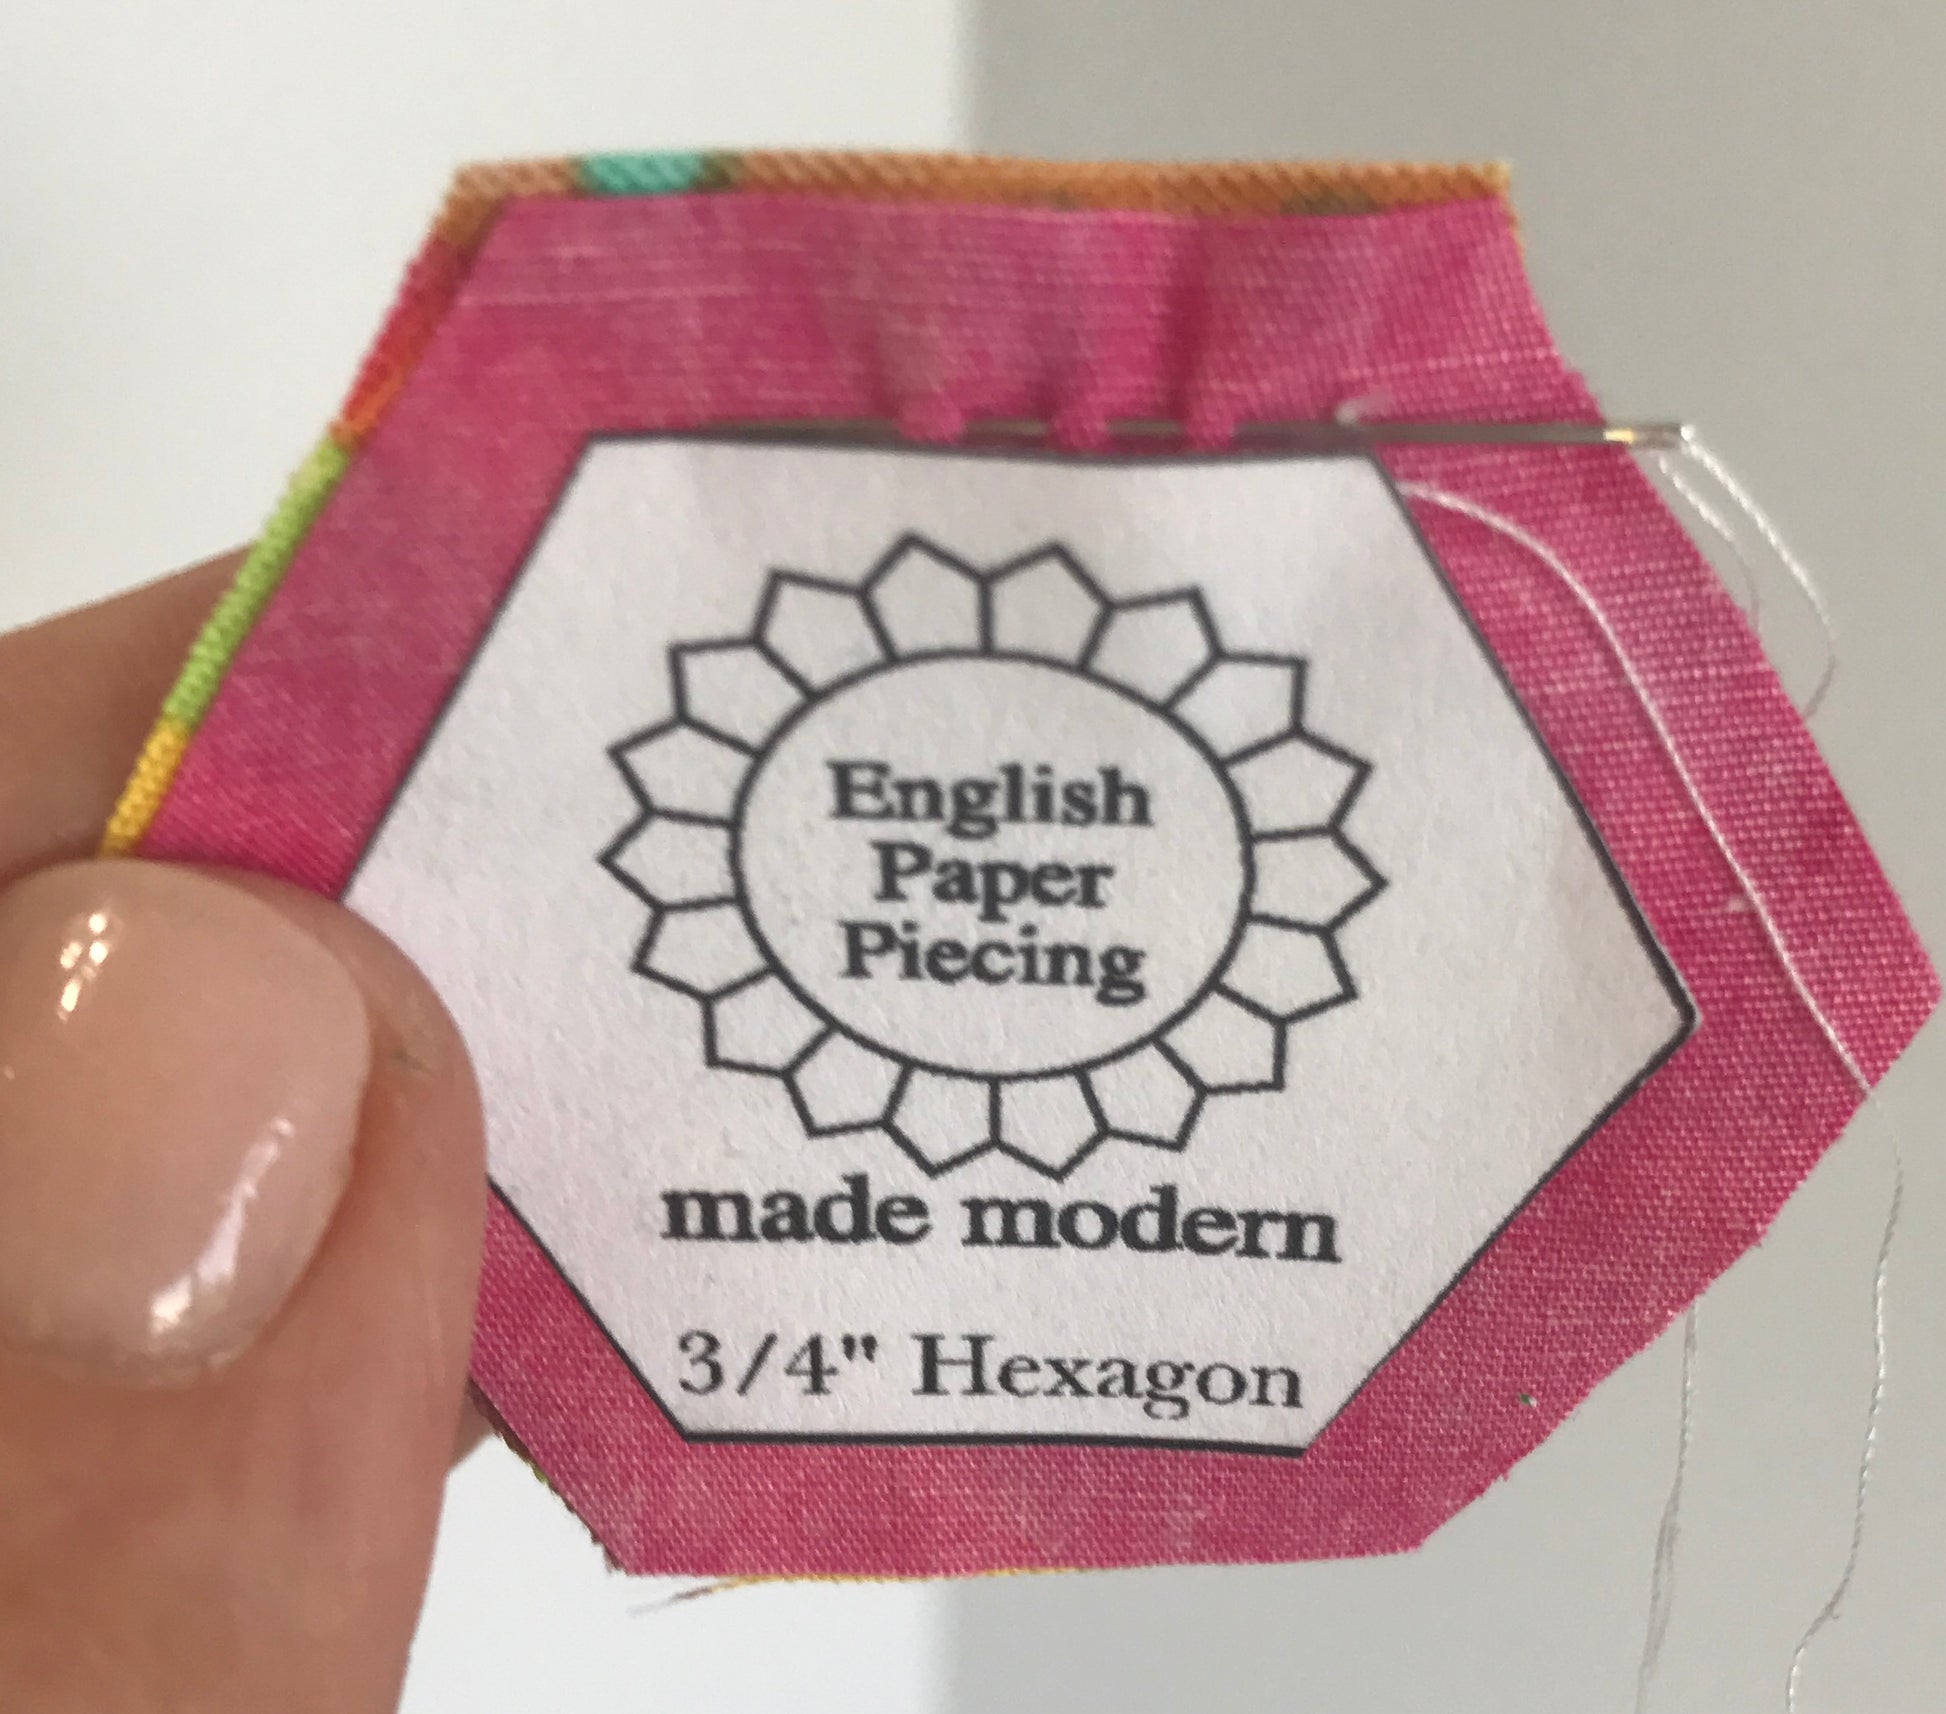 English Paper PIecing Made Modern straight stitch by hand